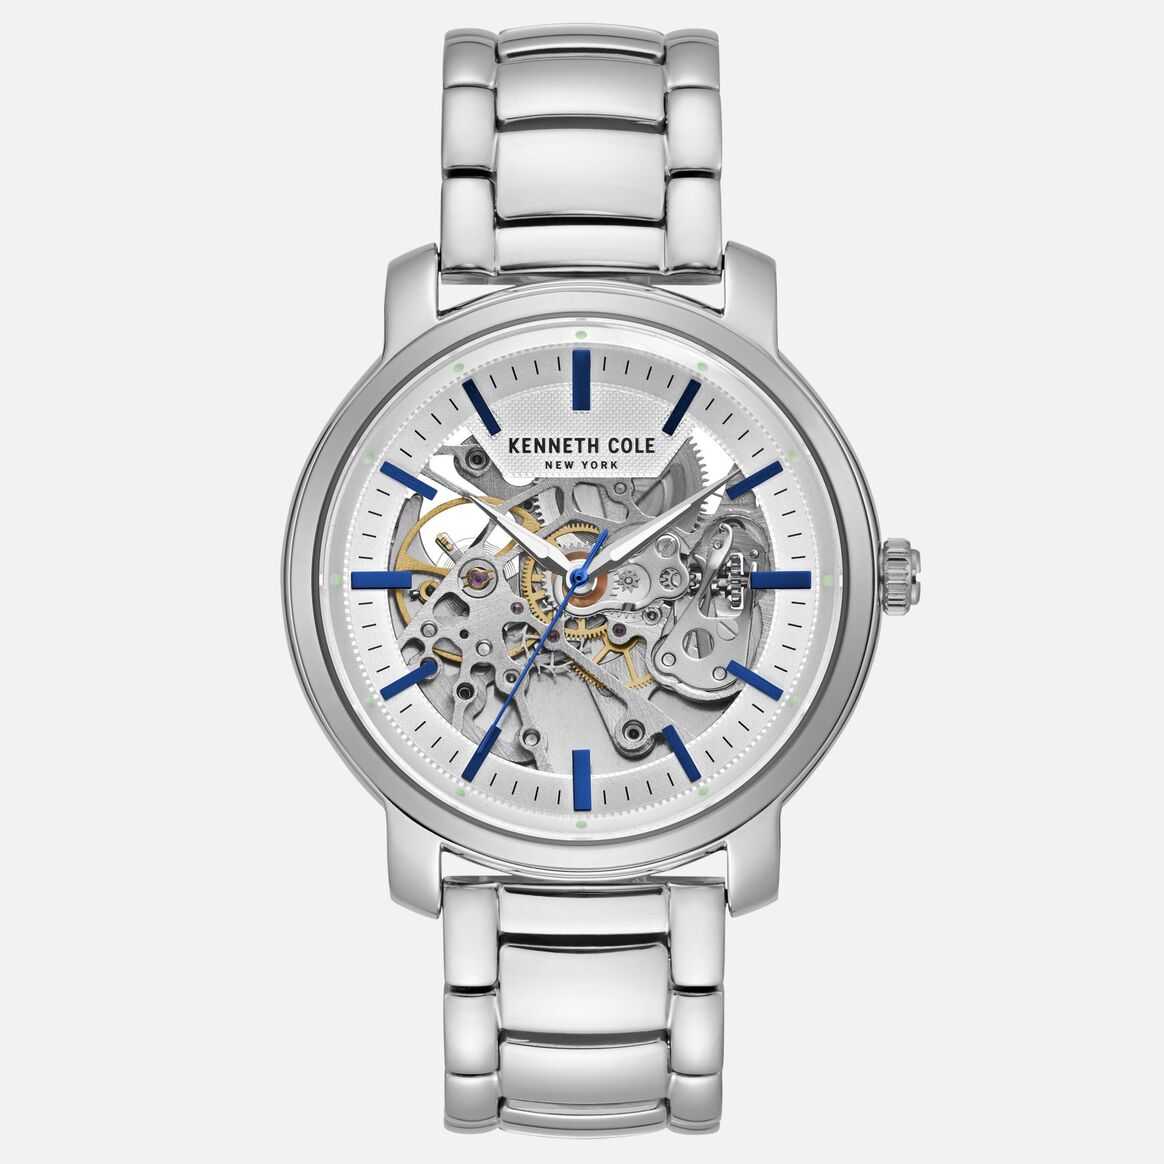 Kenneth Cole - White & Silver Automatic Skeleton